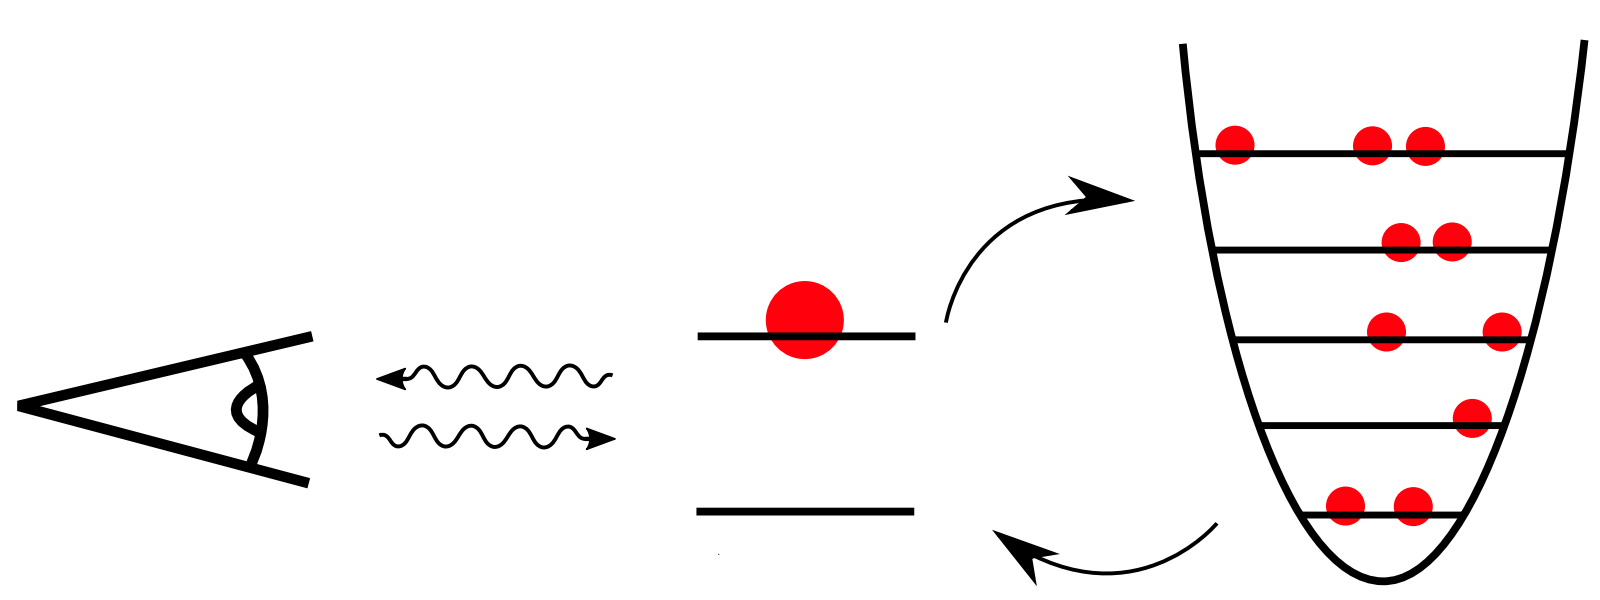 Qubit interacting with an environment and being measured by an observer.